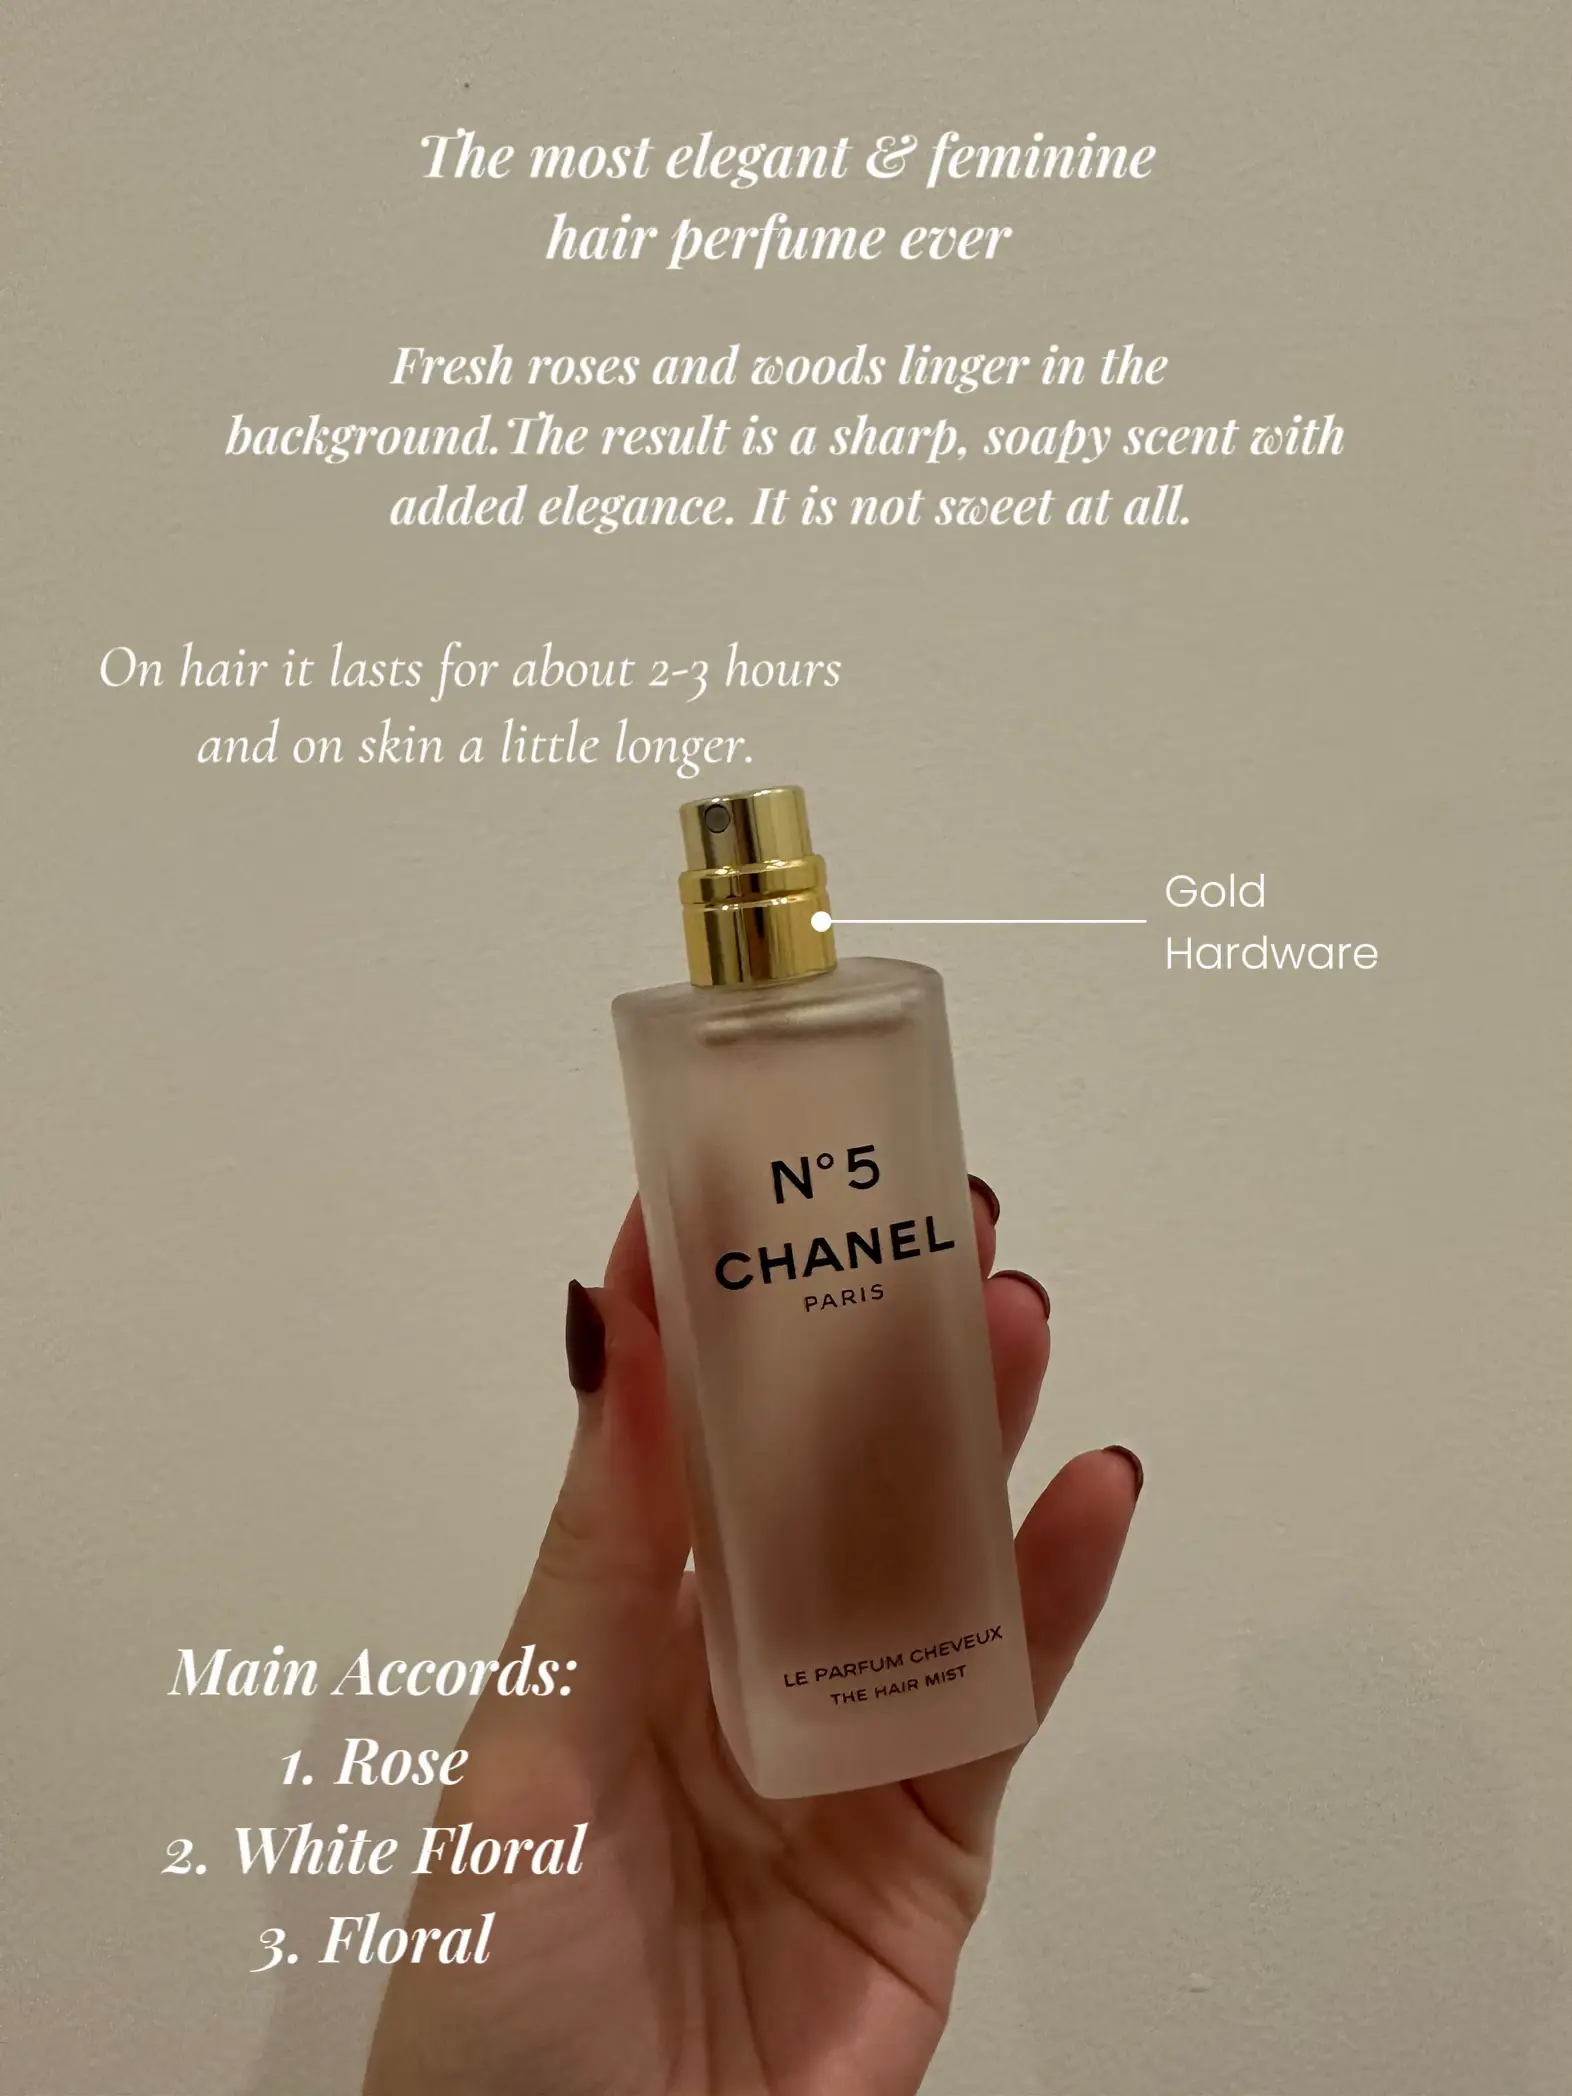 Chanel Hair Mist Review 💞🧘🏼‍♀️🧉